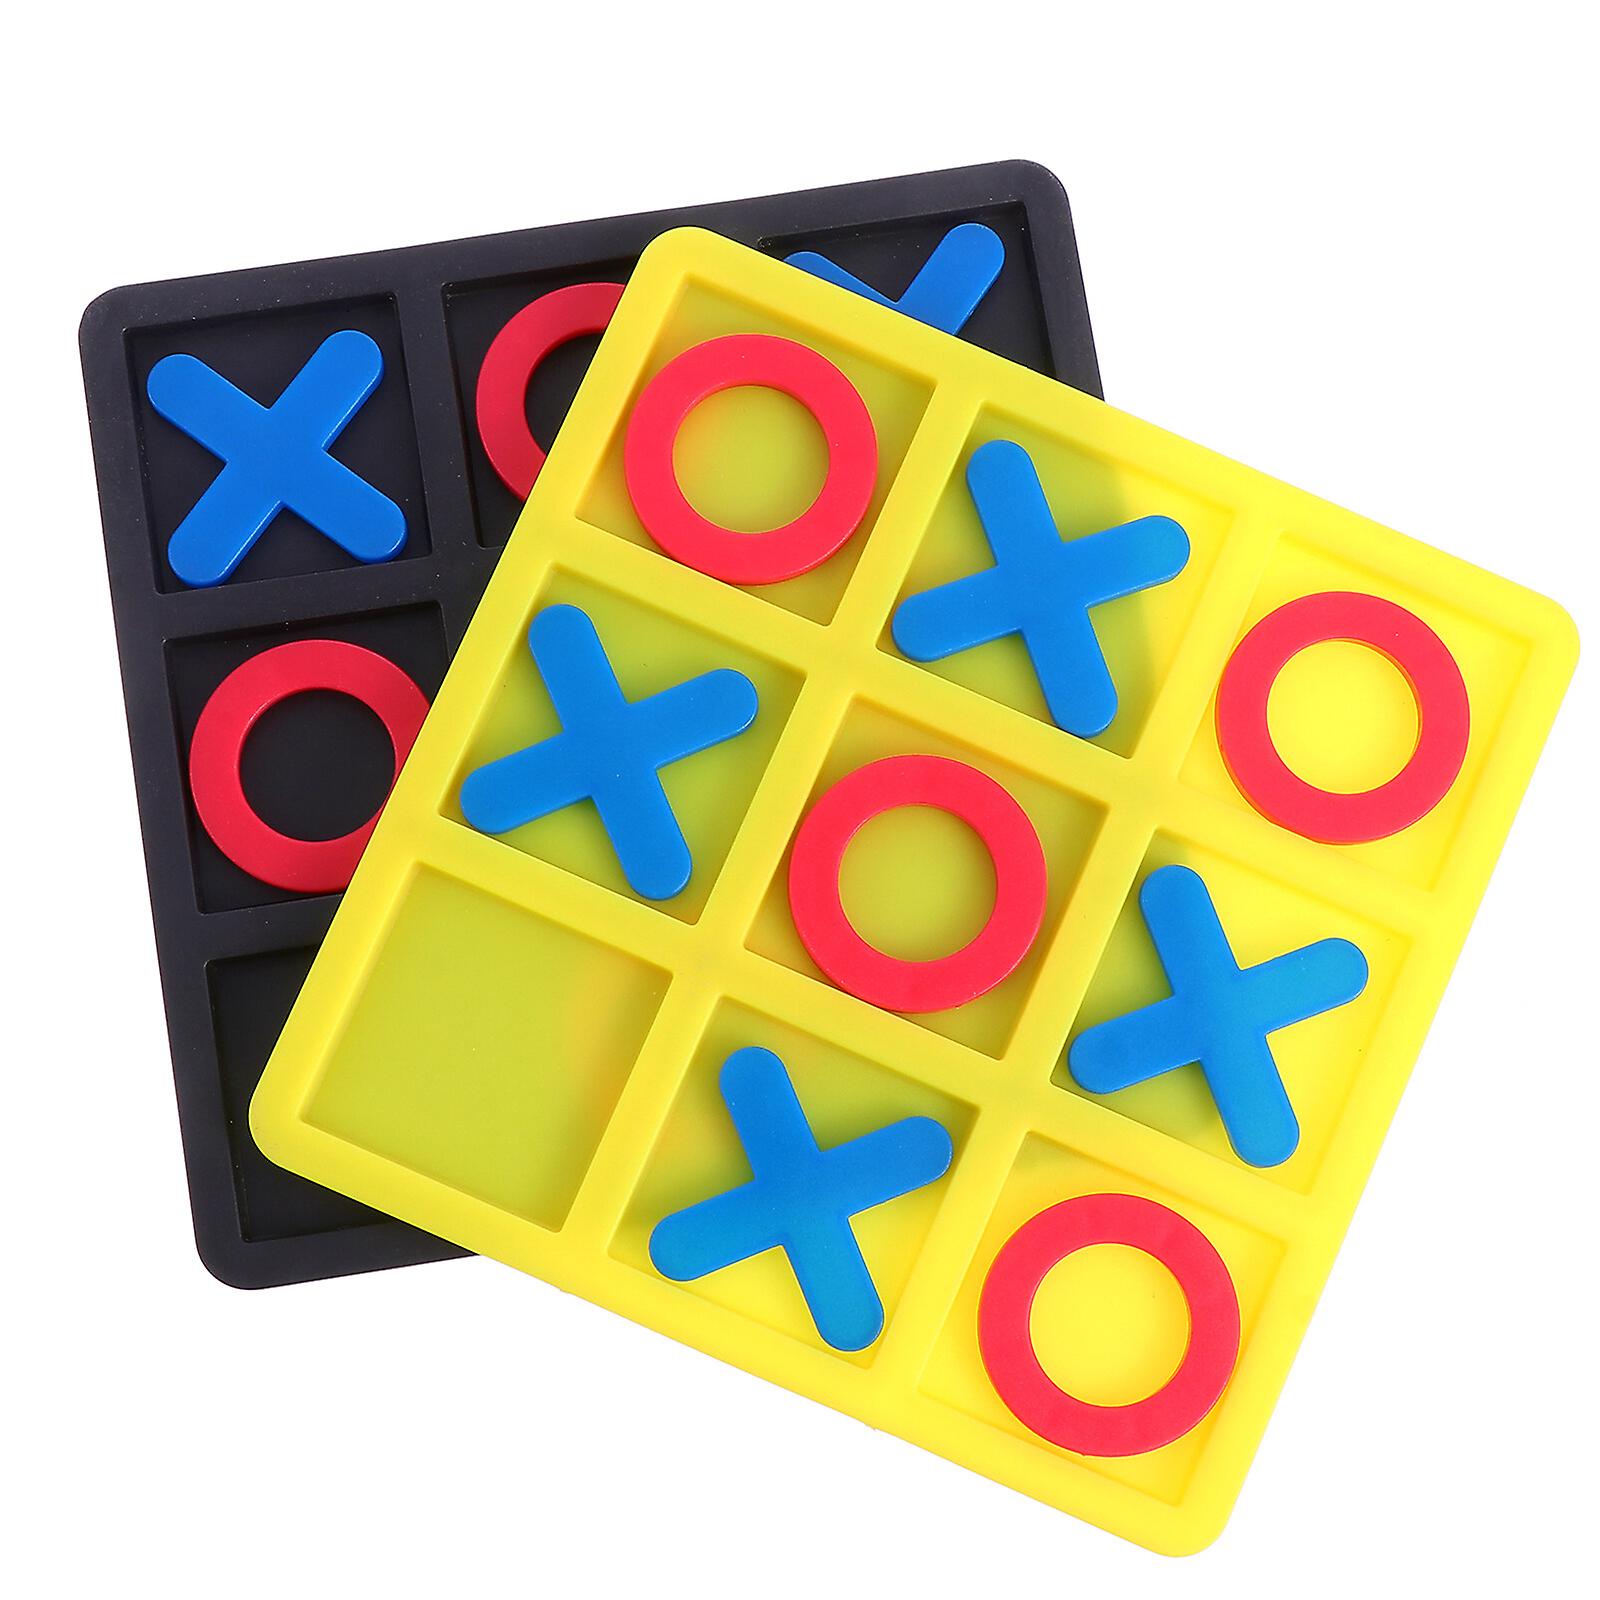 2 Boxes Tic Tac Toe Game Bulk Toy Party Games Tactile Puzzle Tactile Tic Tac Toe